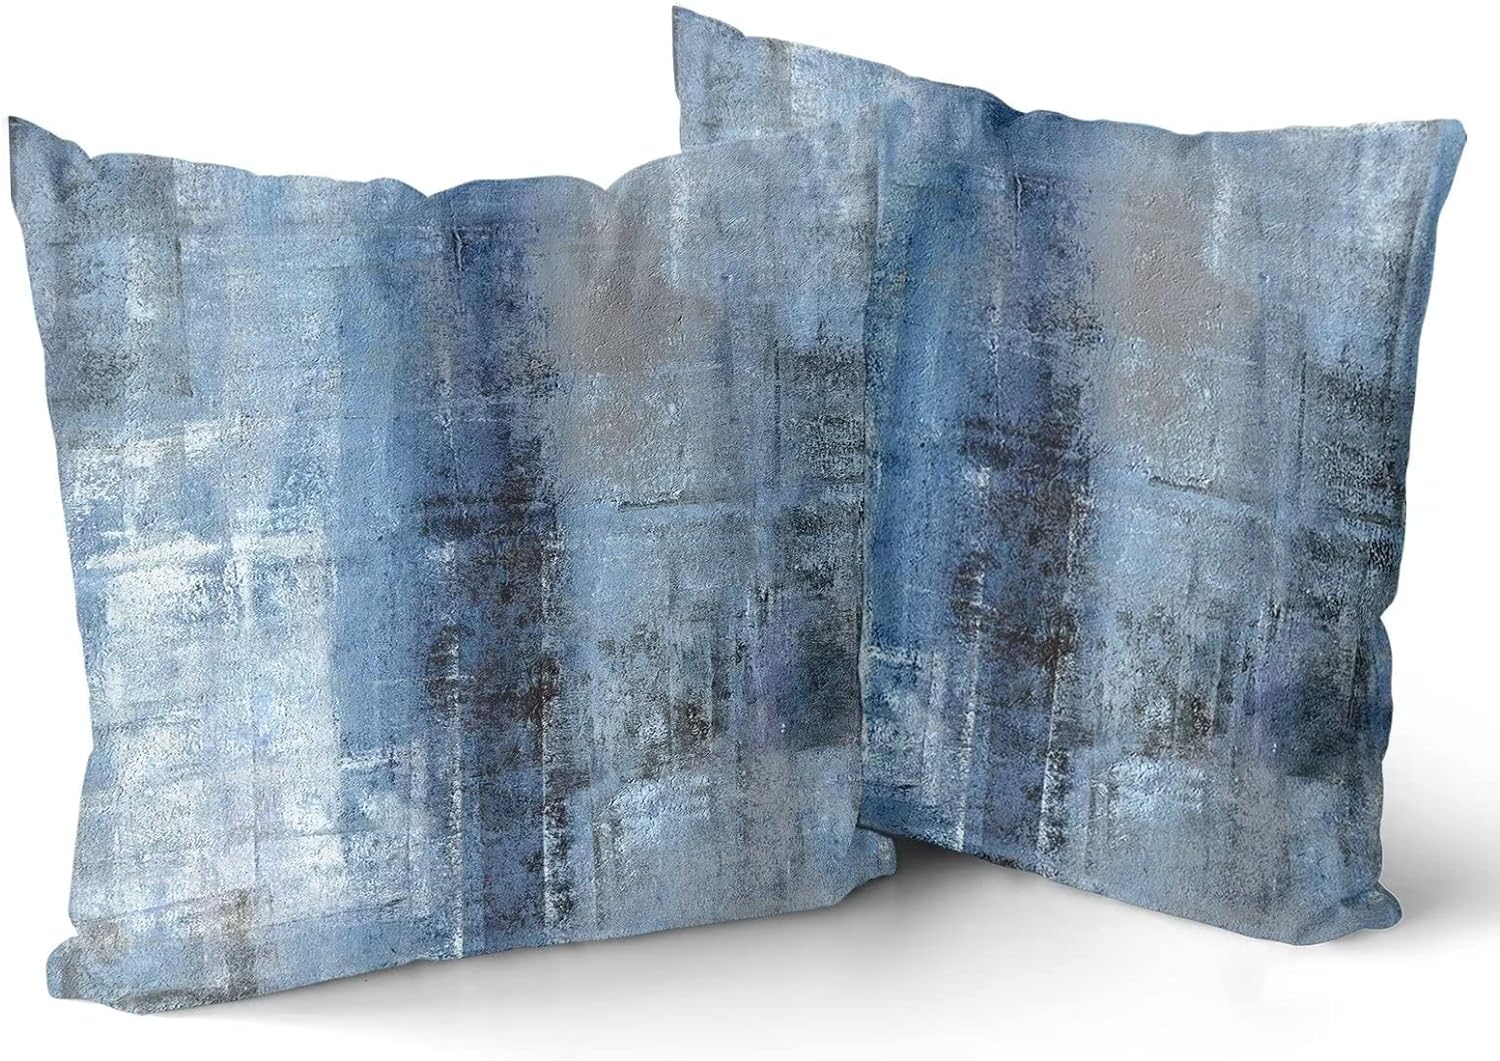 ABSOP Blue Pillow Covers 18x18 Inch Set of 2 Grey Abstract Art Pillowcases Room Decor Modern Painting Throw Pillows Cushion Cover for Sofa Bedroom Indoor Outdoor Decoration